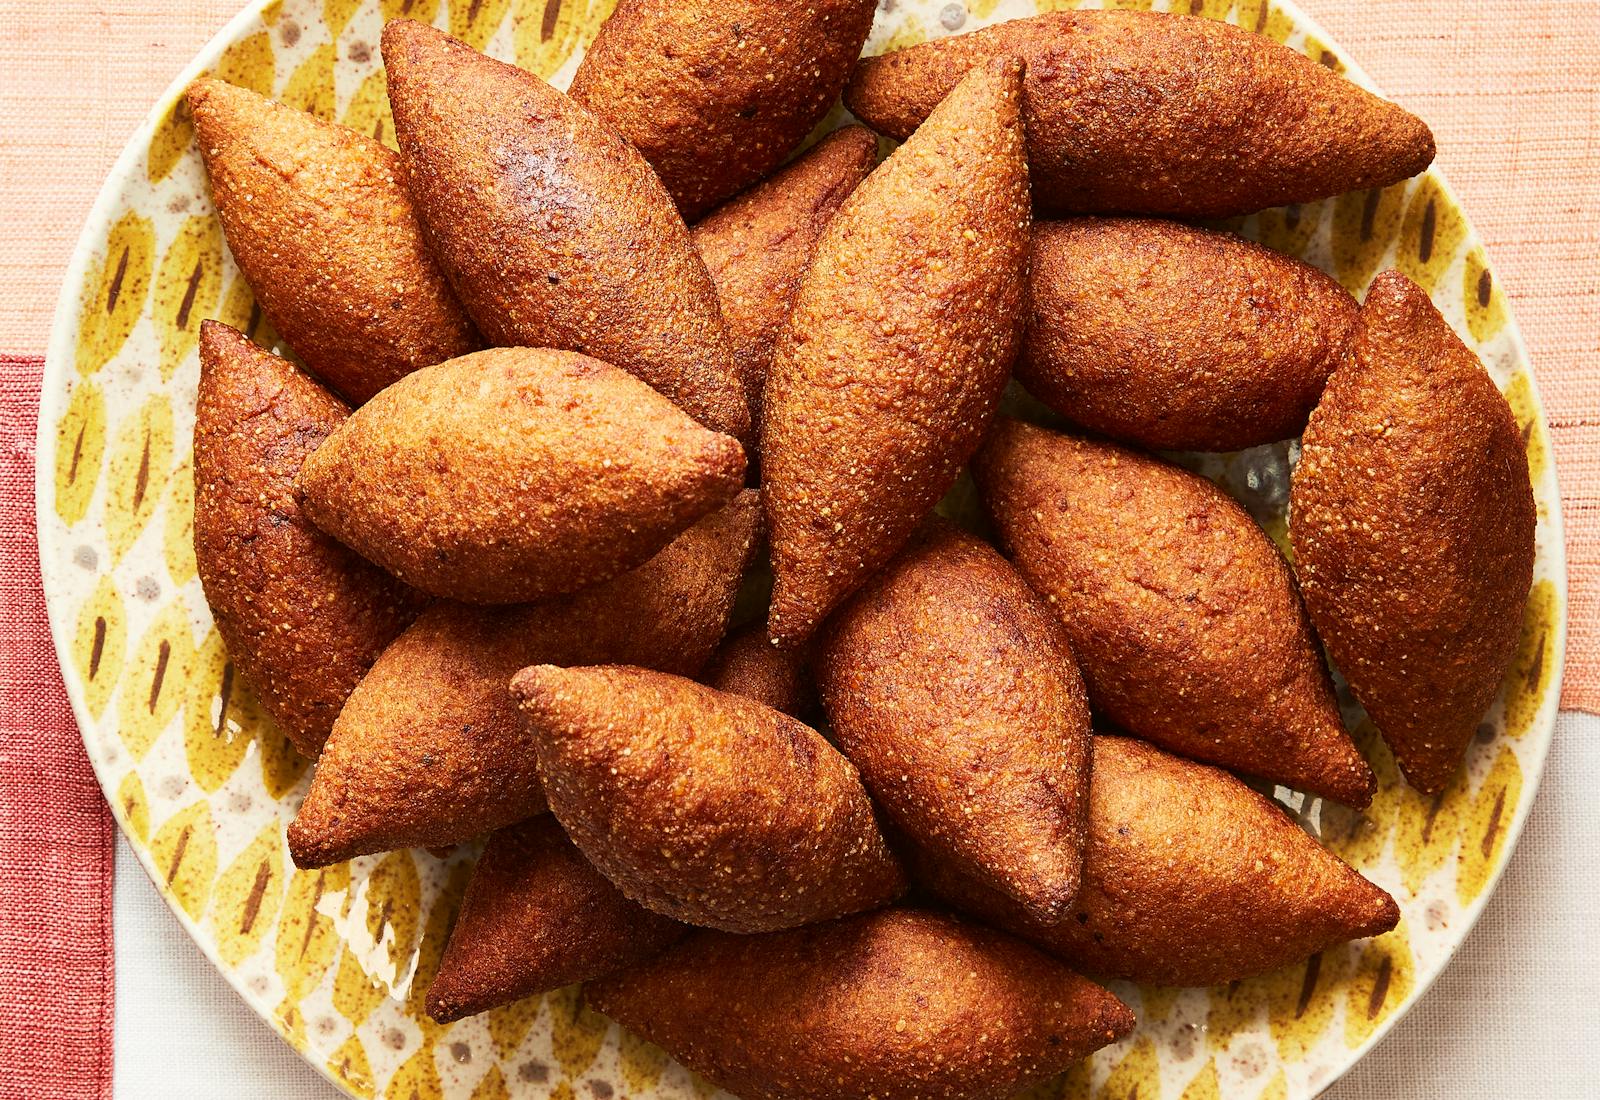 Pile of fried kibbeh on yellow graphic dish.